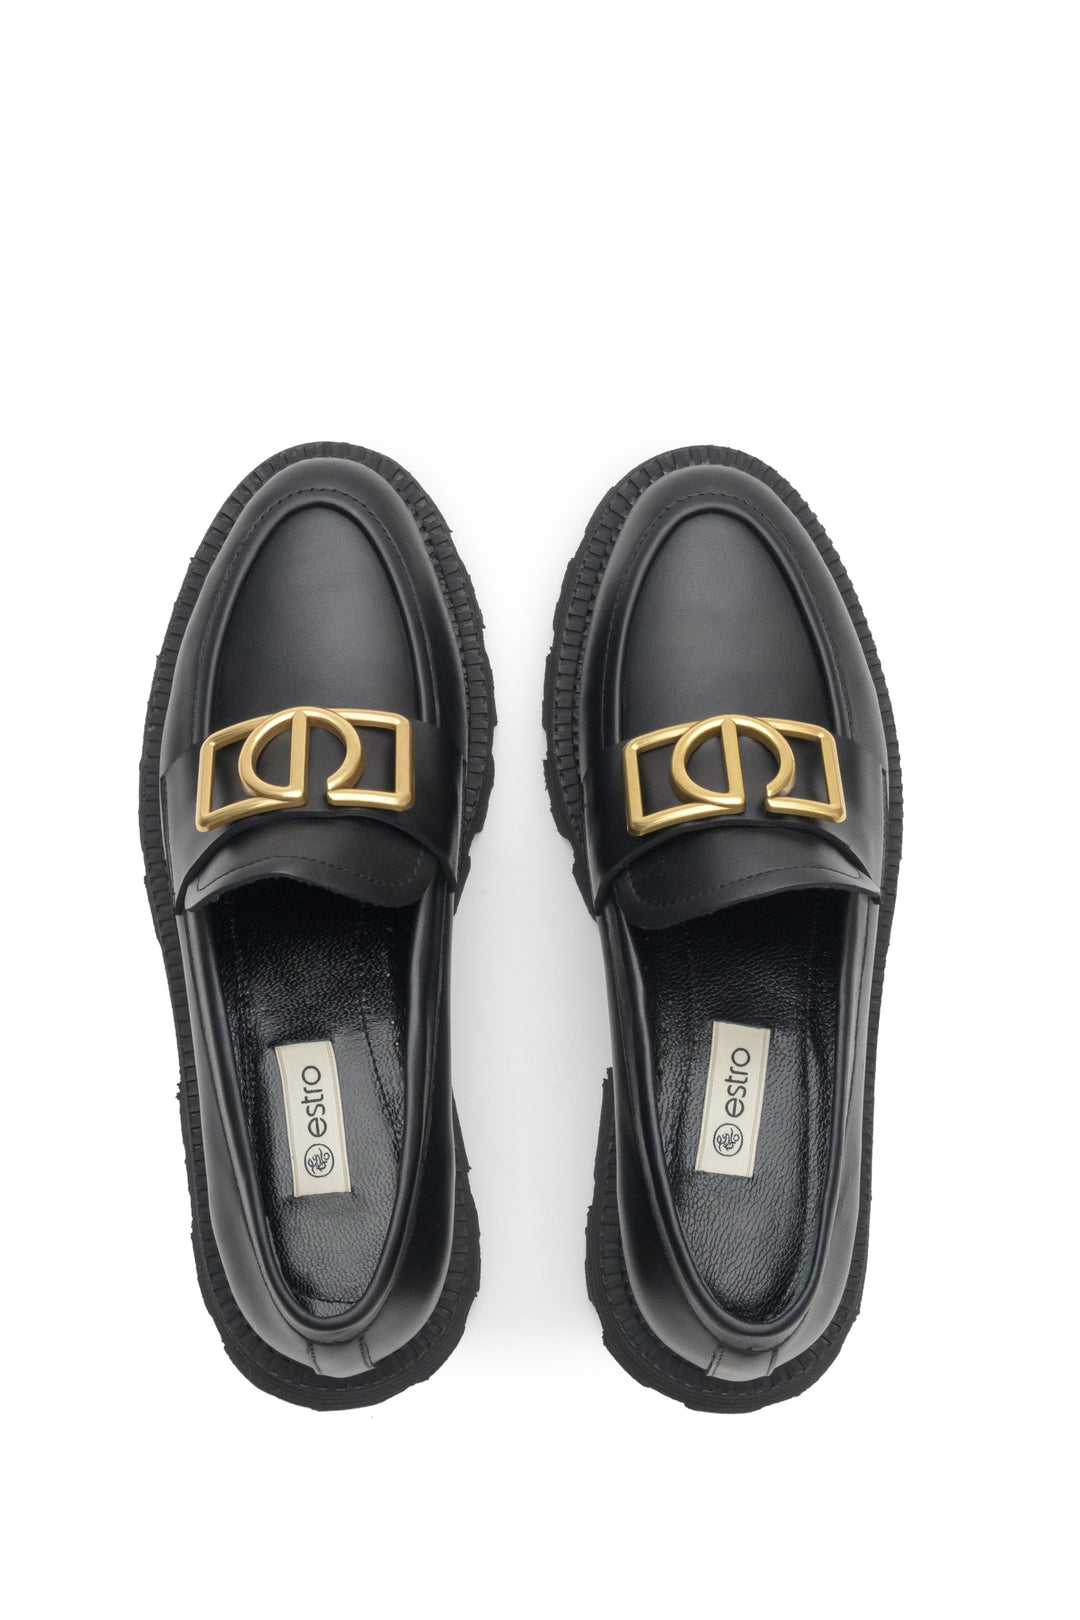 Black women's loafers made of natural leather with gold chain - presentation of the footwear from above.